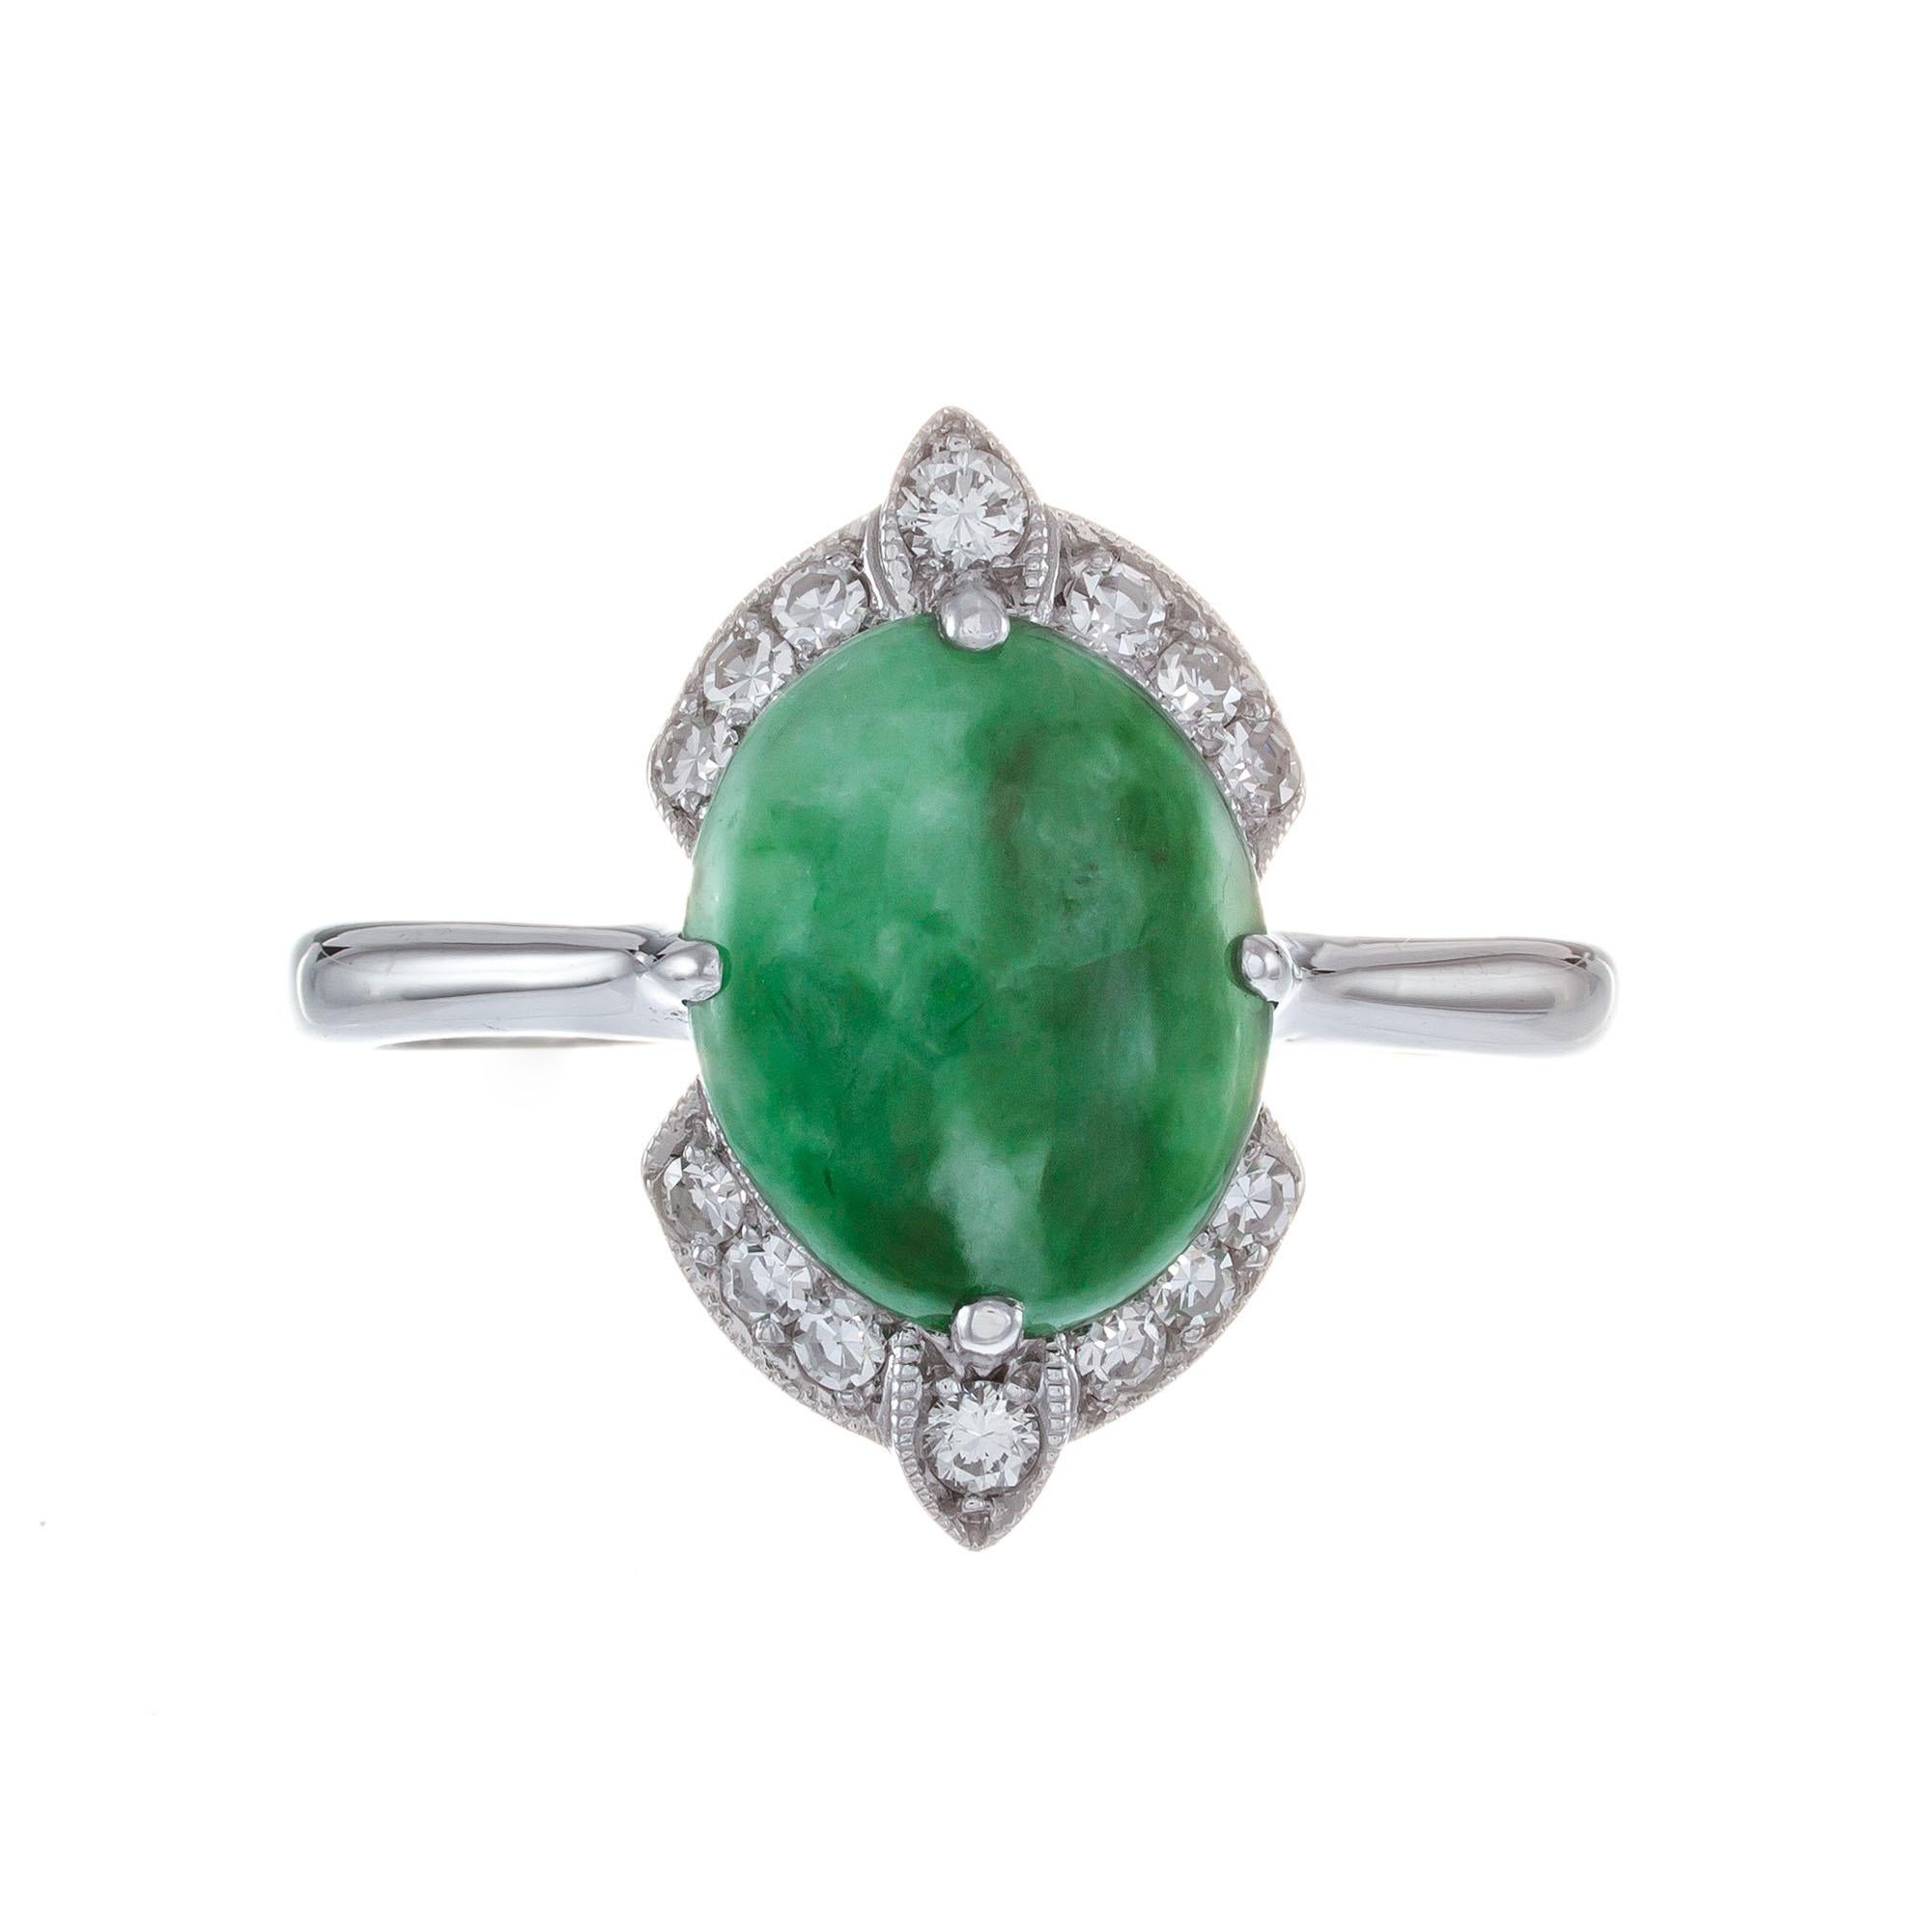 Vintage 1950's natural untreated GIA certified Jadeite Jade and diamond halo ring, set in 14k white gold setting.  

1 oval cabochon mottled green jade, GIA Certificate # 5202495317
2 round brilliant cut diamonds G VS, approx. .5ct
12 single cut